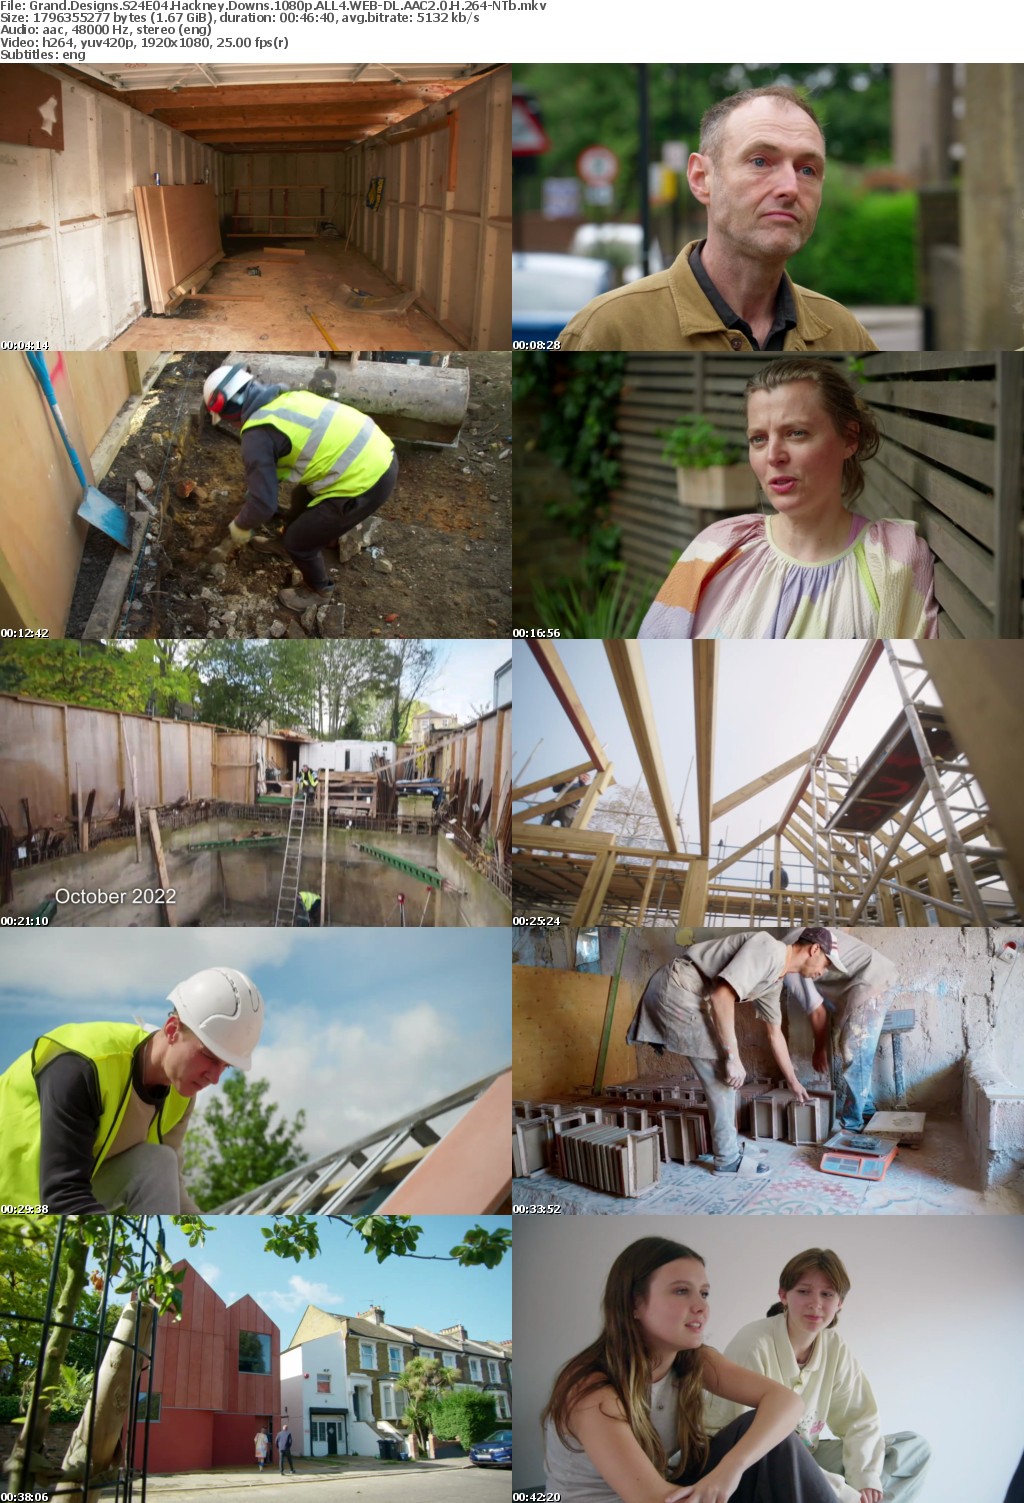 Grand Designs S24E04 Hackney Downs 1080p ALL4 WEB-DL AAC2 0 H 264-NTb